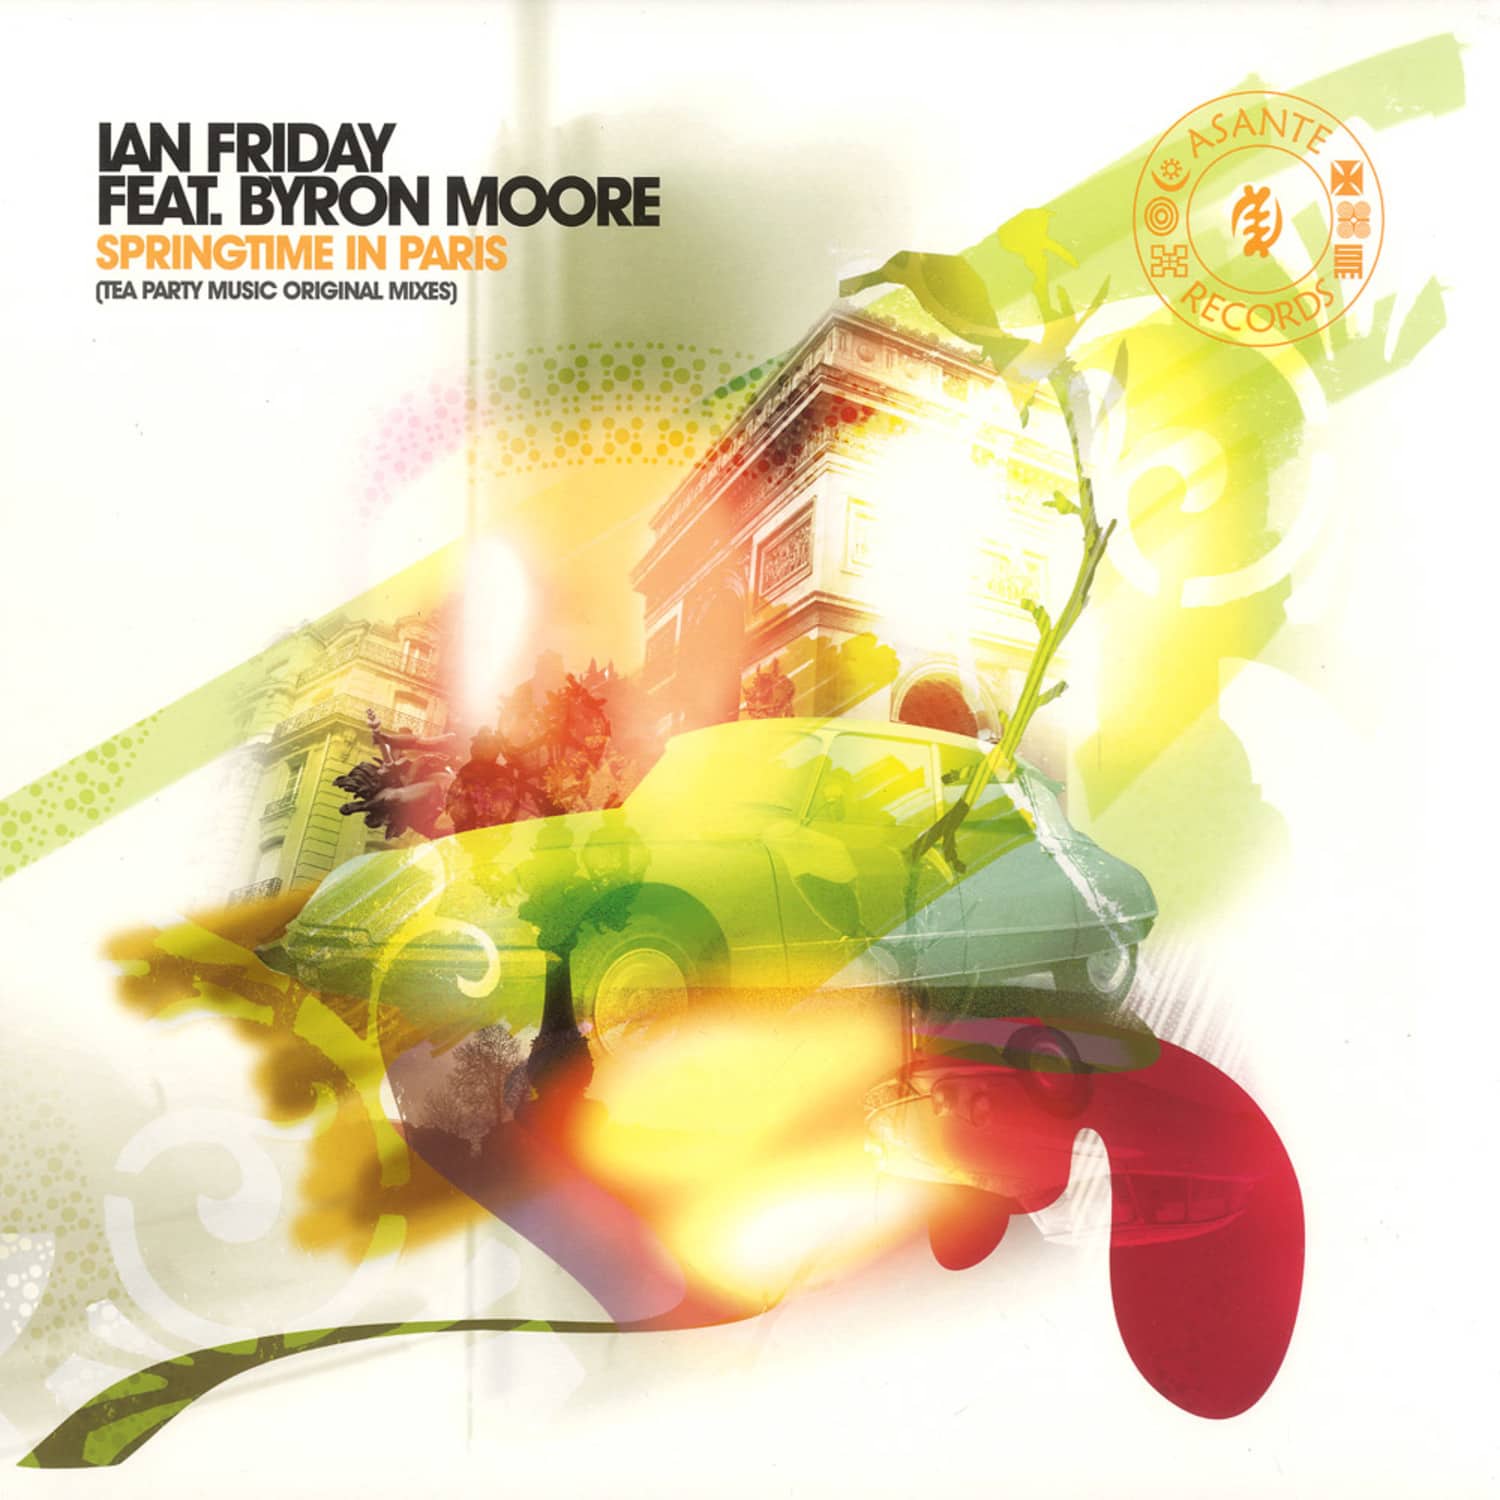 Ian Friday feat. Byron Moore - SPRINGTIME IN PARIS